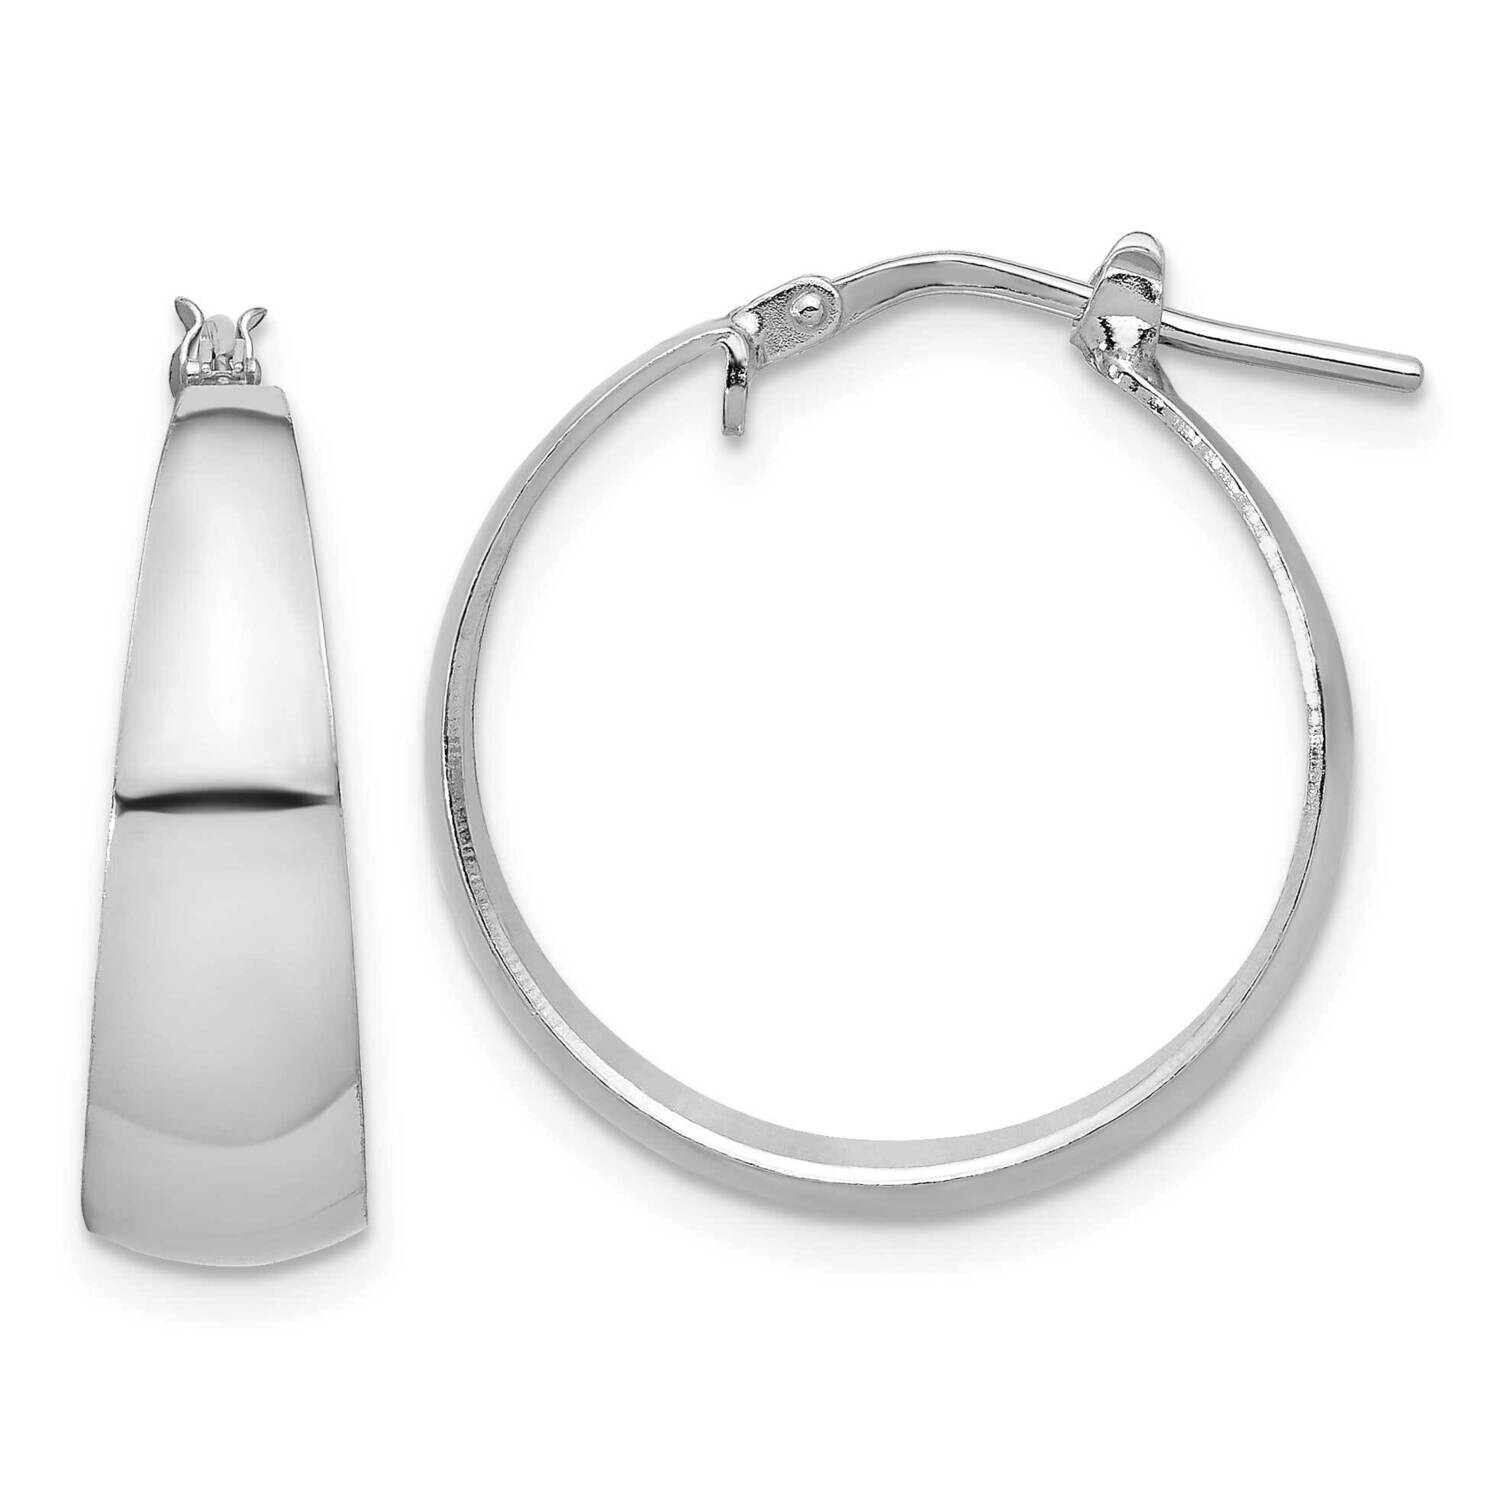 Rh-Plated Polished Tapered Round Large Hoop Earrings Sterling Silver QE16900